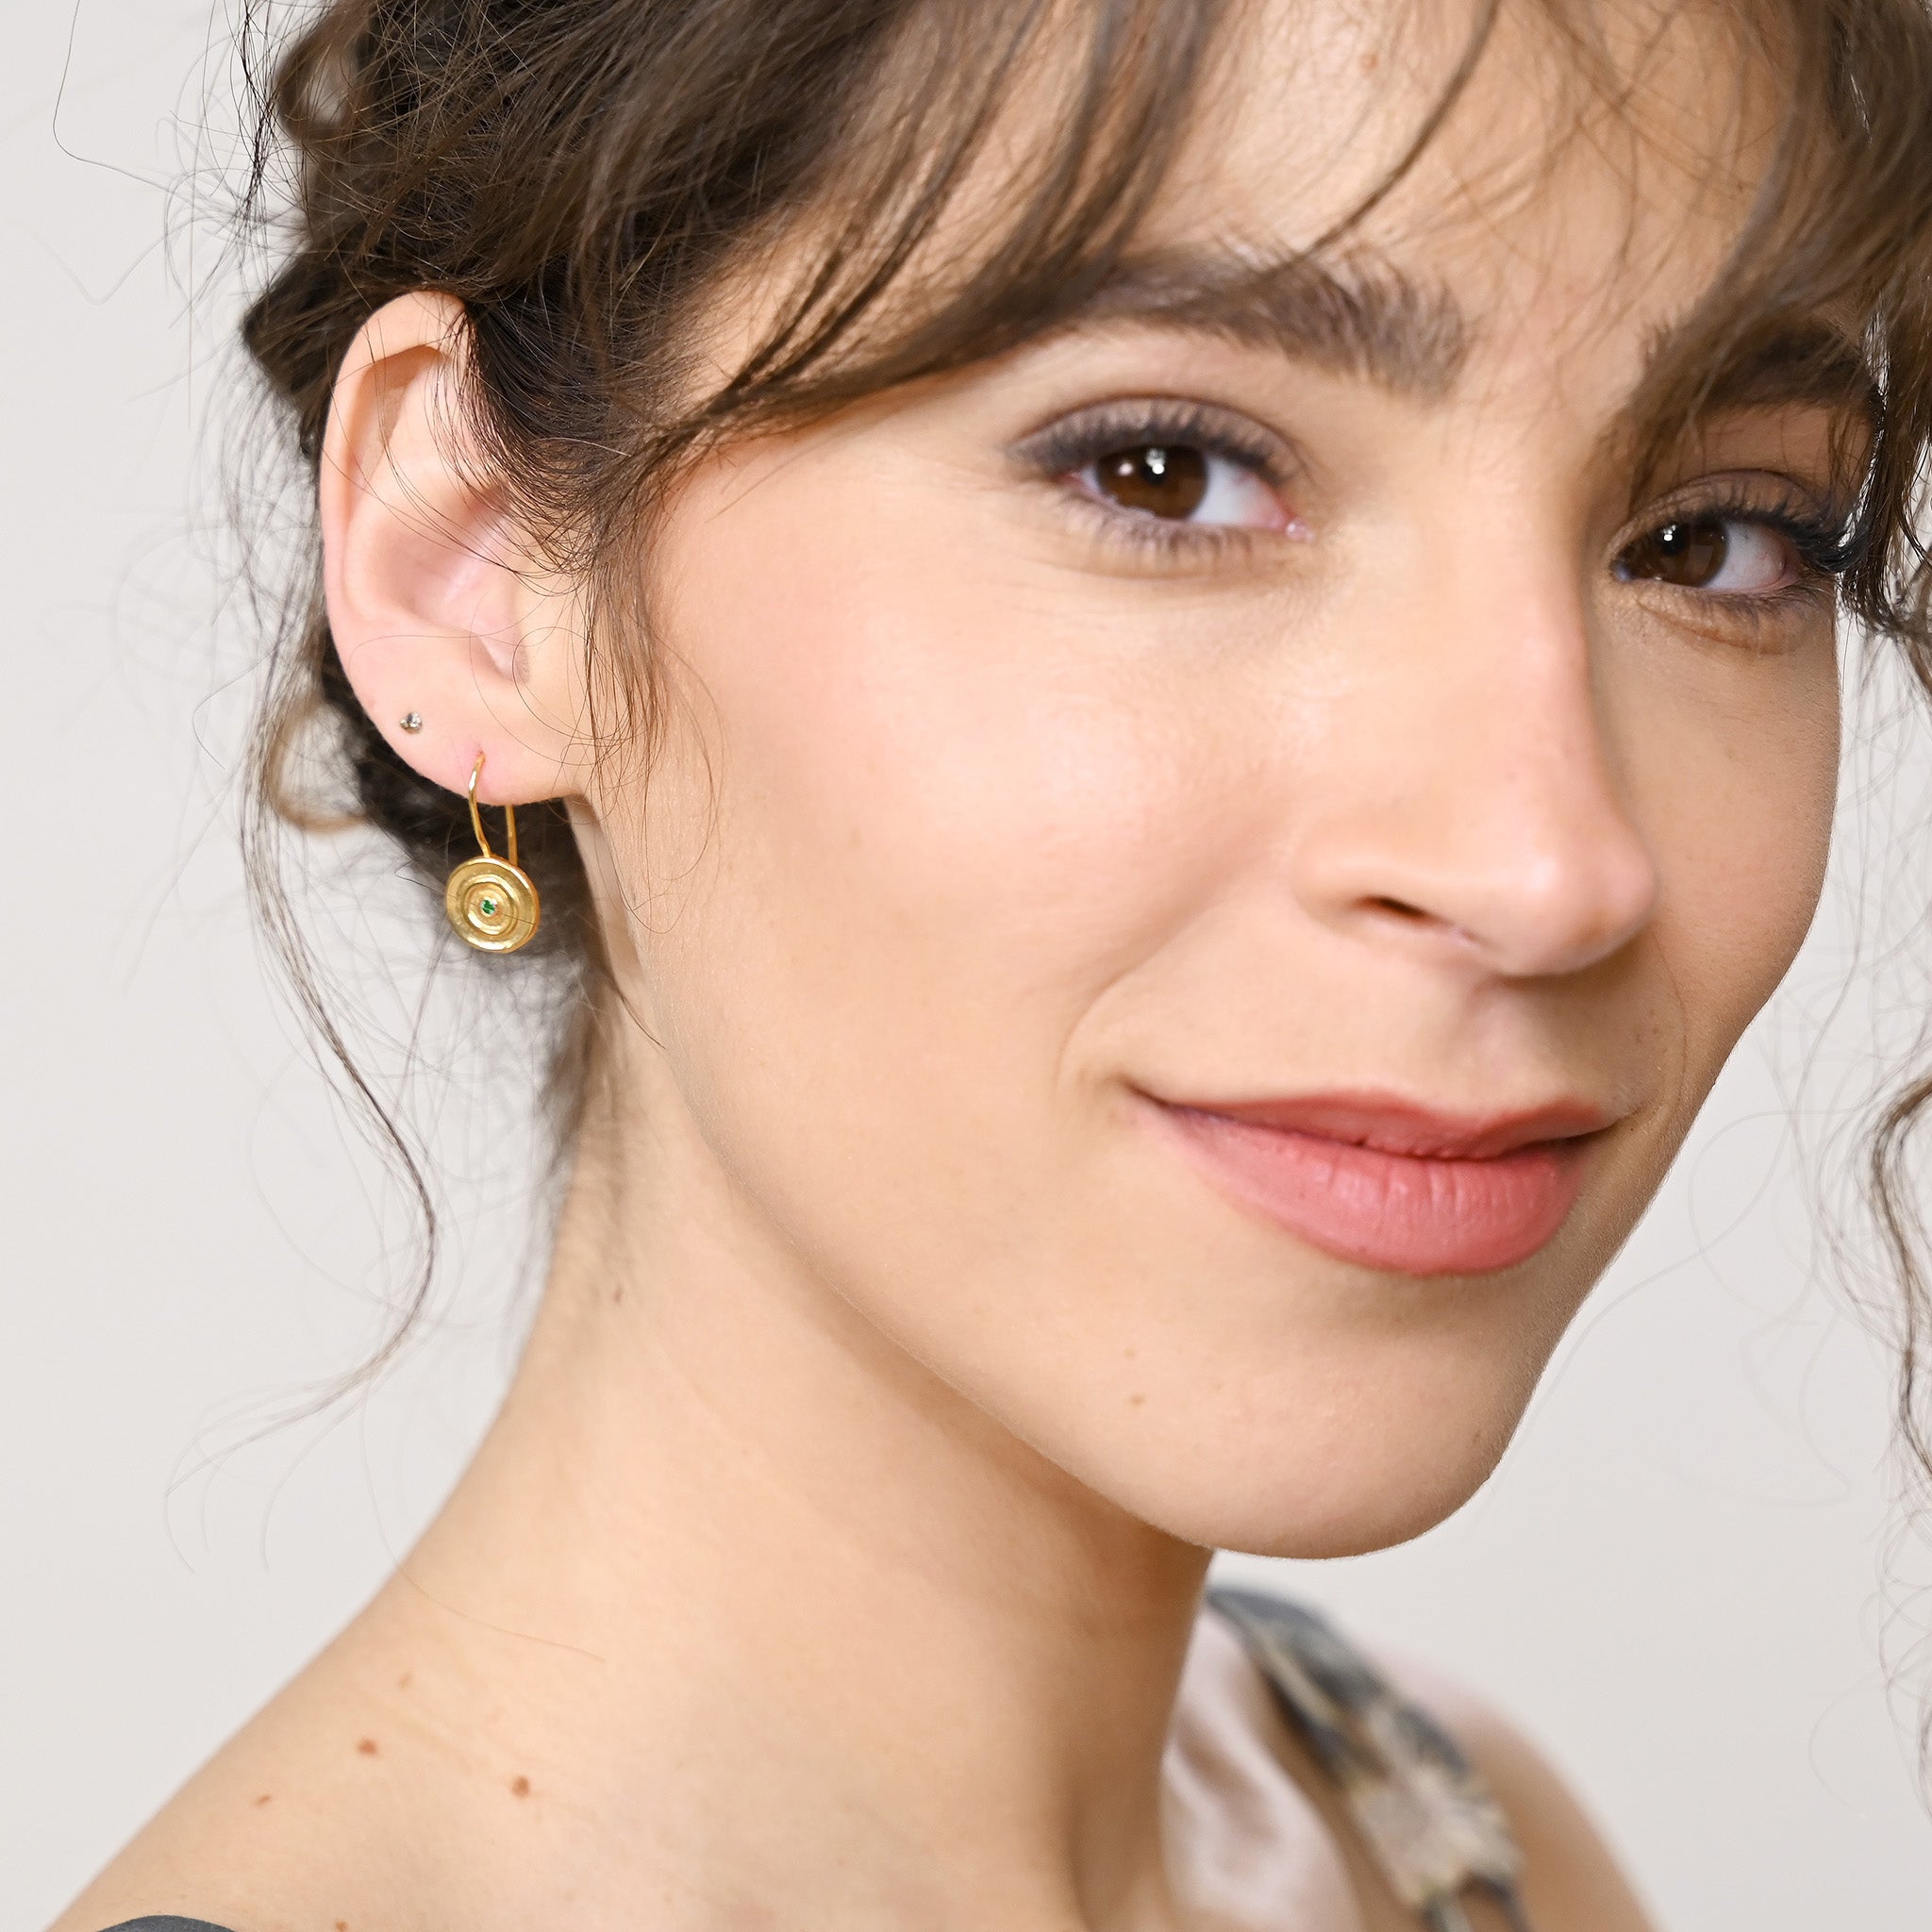 Model displaying an Hand-made 18k gold round drop earrings with a central Emerald gemstone, inspired by ancient Egyptian Pharaohs' gold jewelry.